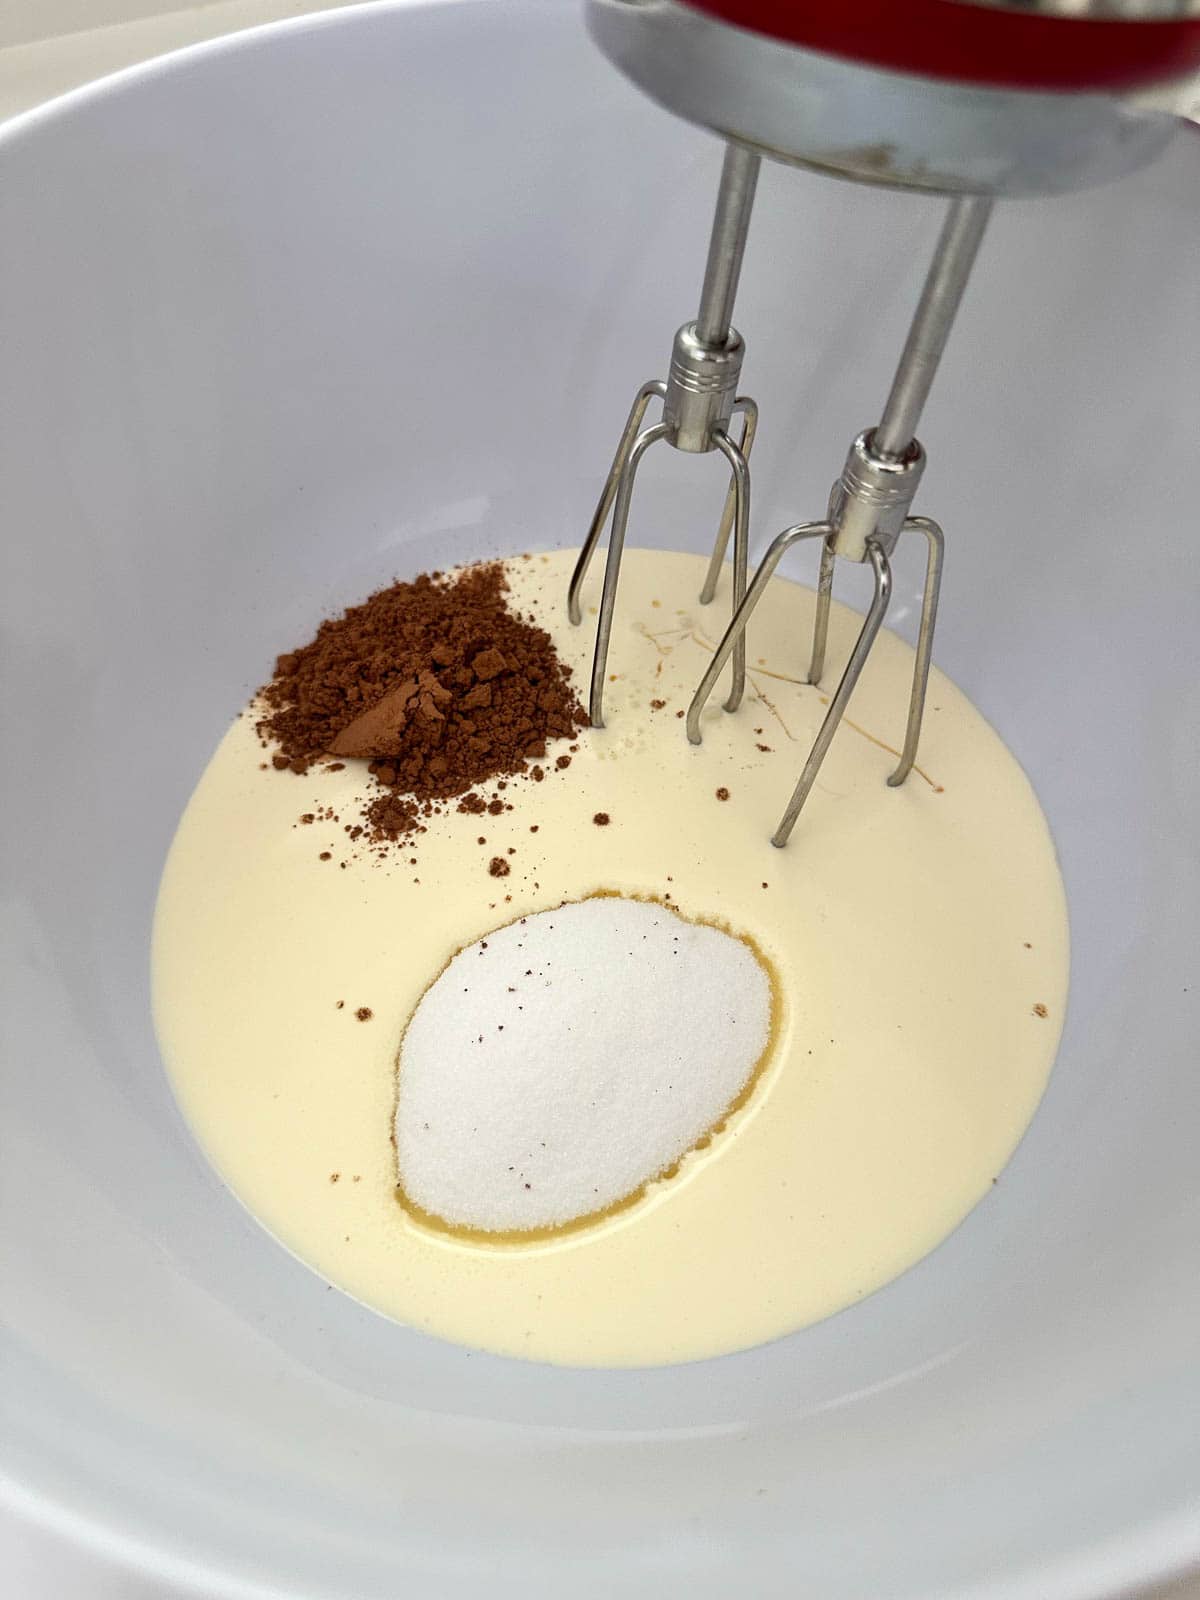 Ingredients for chocolate buttercream in a bowl.